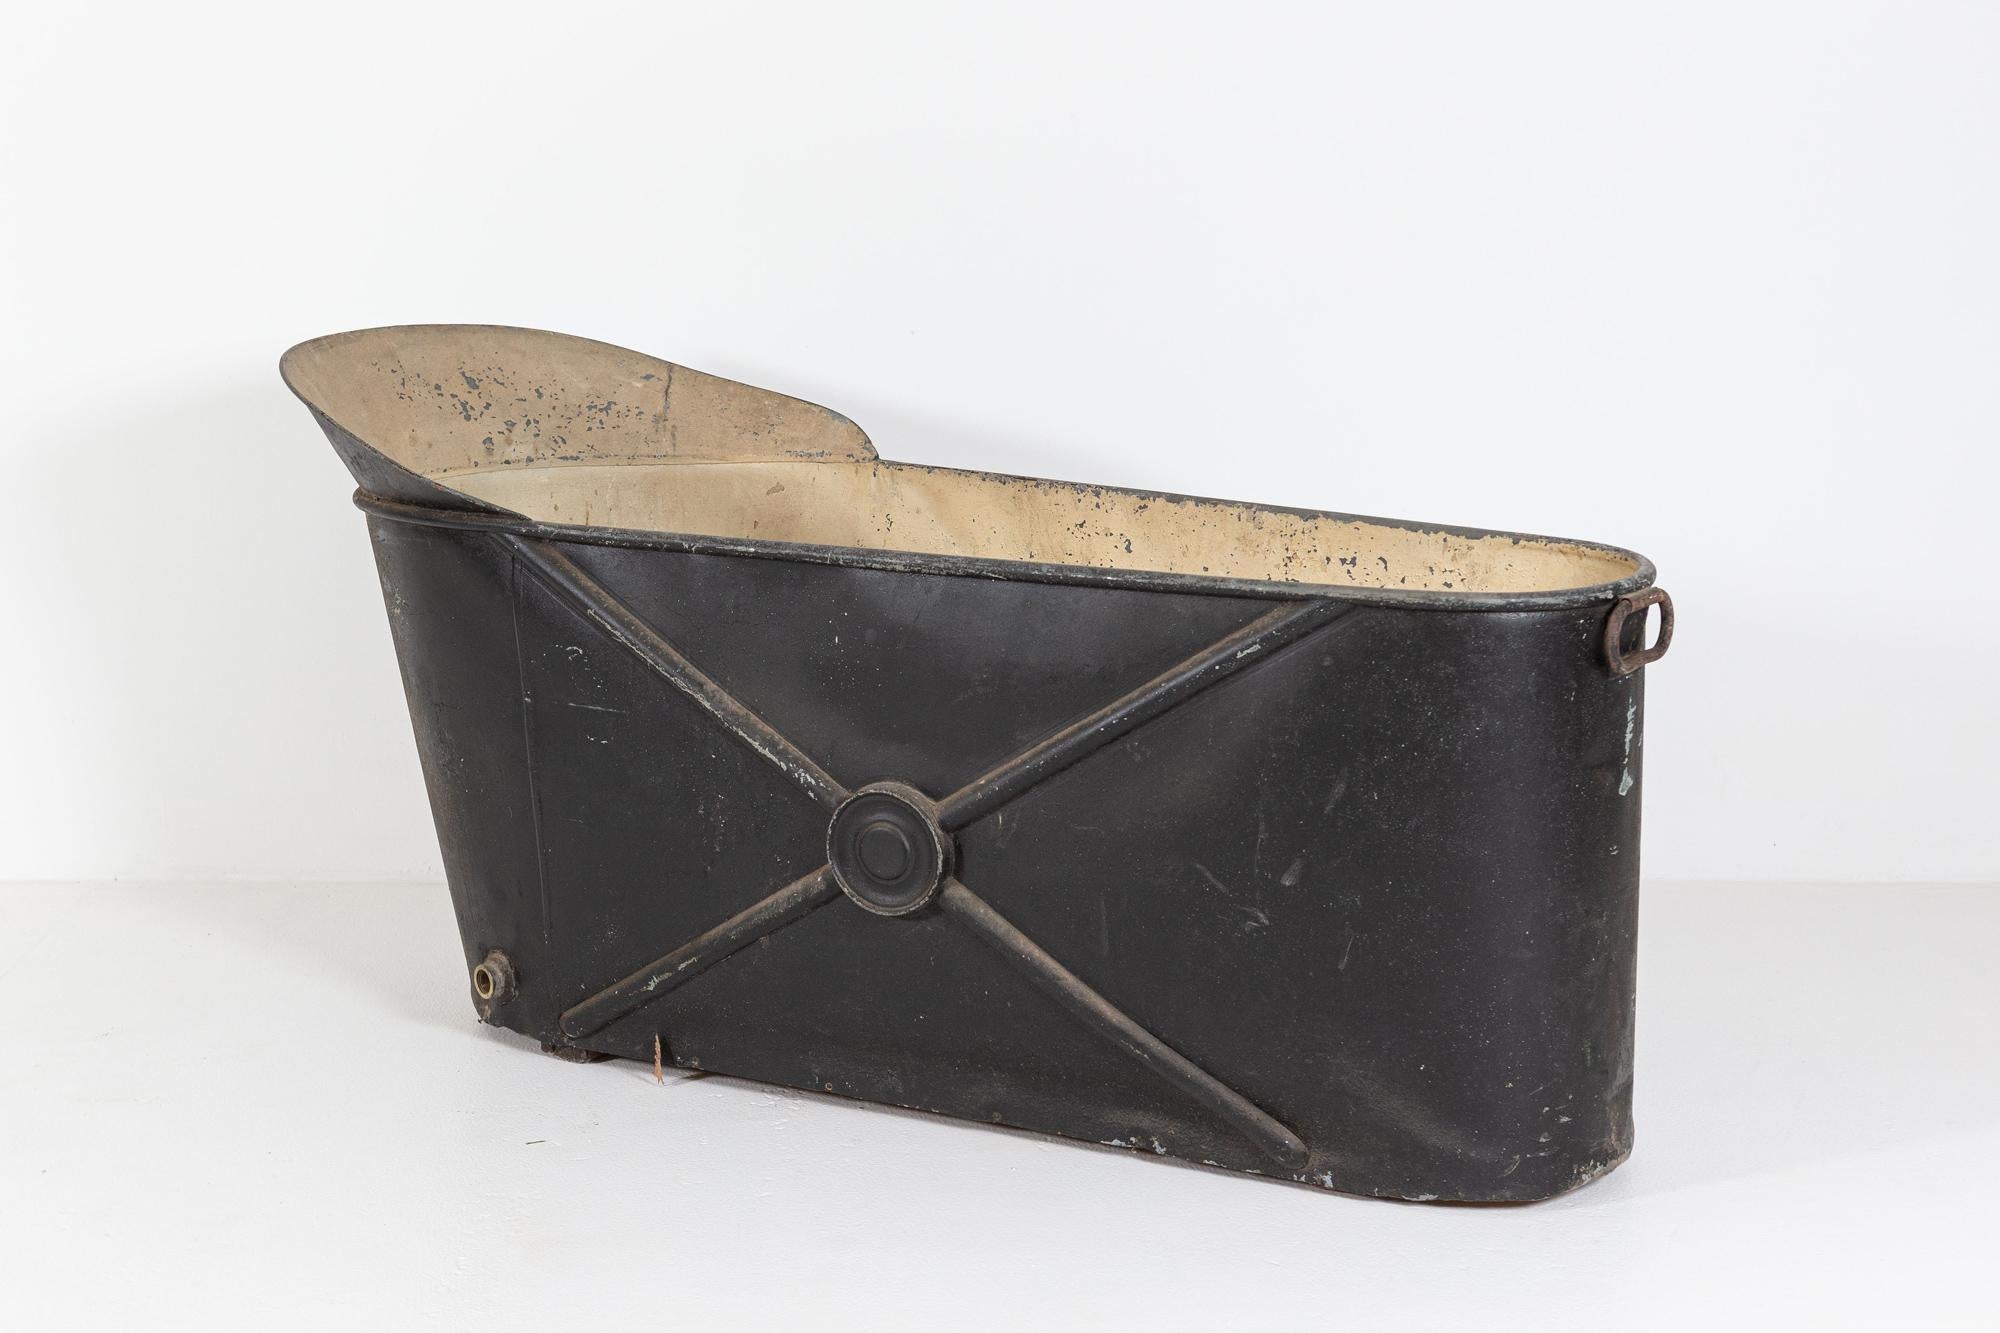 Circa 1850.

19th C black painted French zinc bath tub

In original paint/condition. It is water tight

Sourced from the South of France



Measures: 150 x D 64 x H 73 cm.